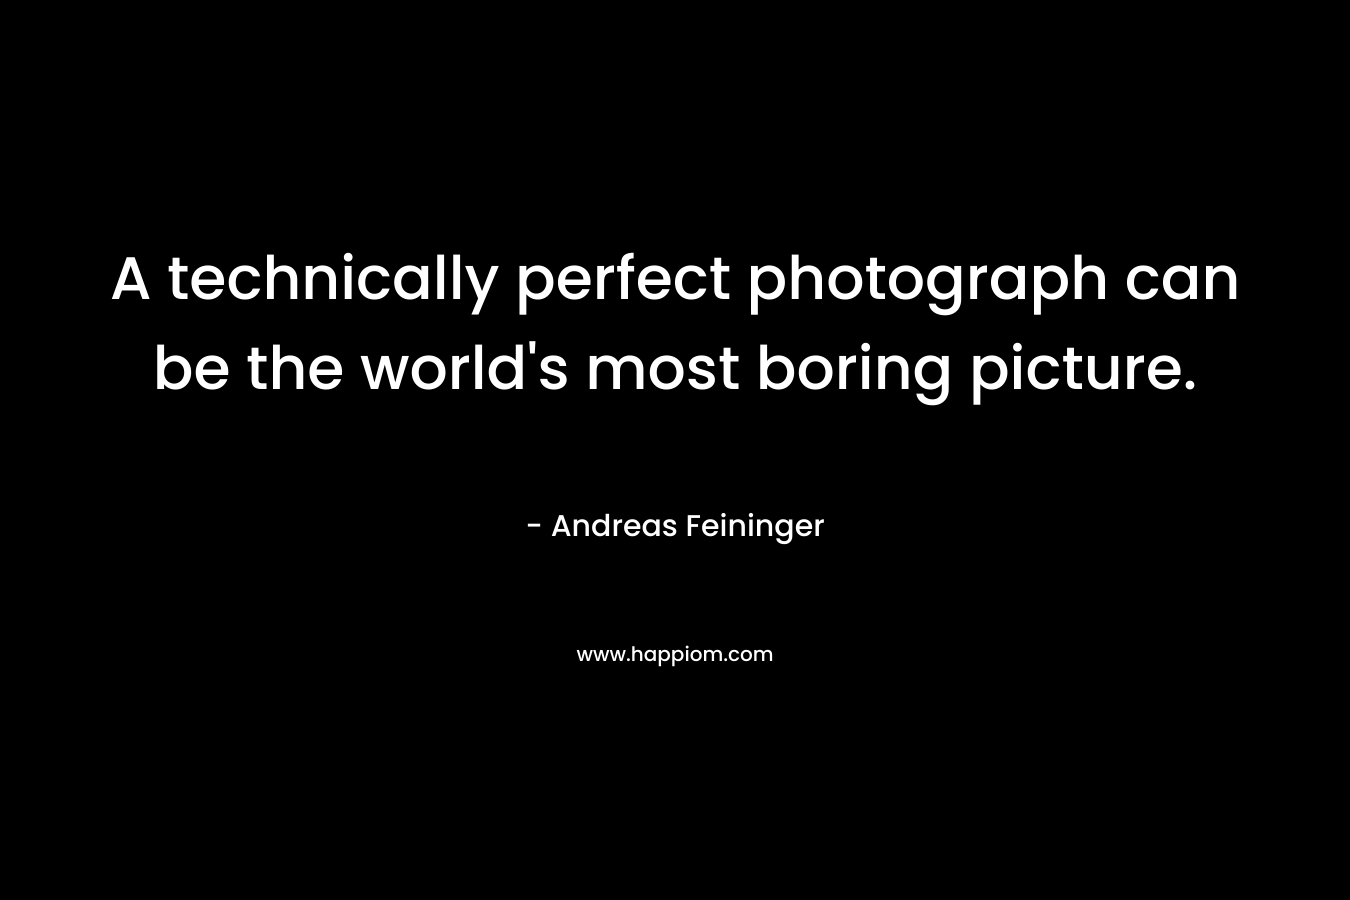 A technically perfect photograph can be the world's most boring picture.